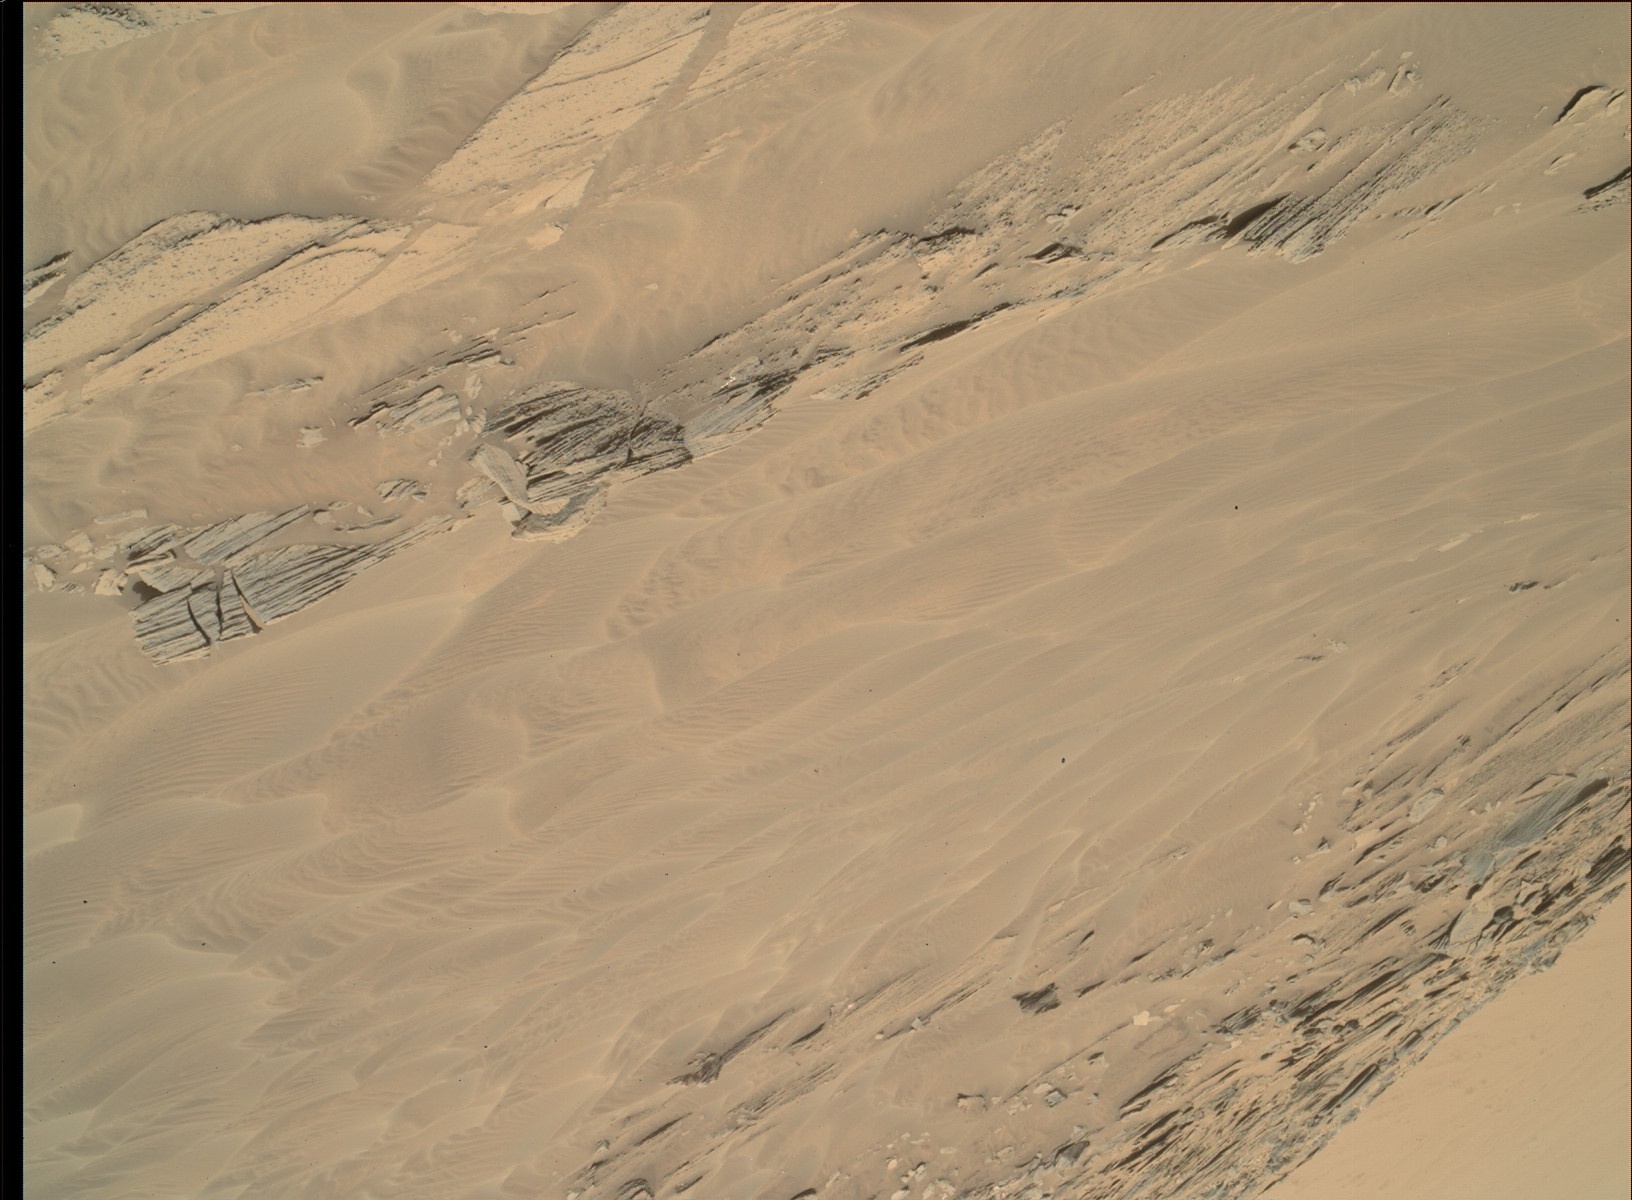 Nasa's Mars rover Curiosity acquired this image using its Mars Hand Lens Imager (MAHLI) on Sol 1352